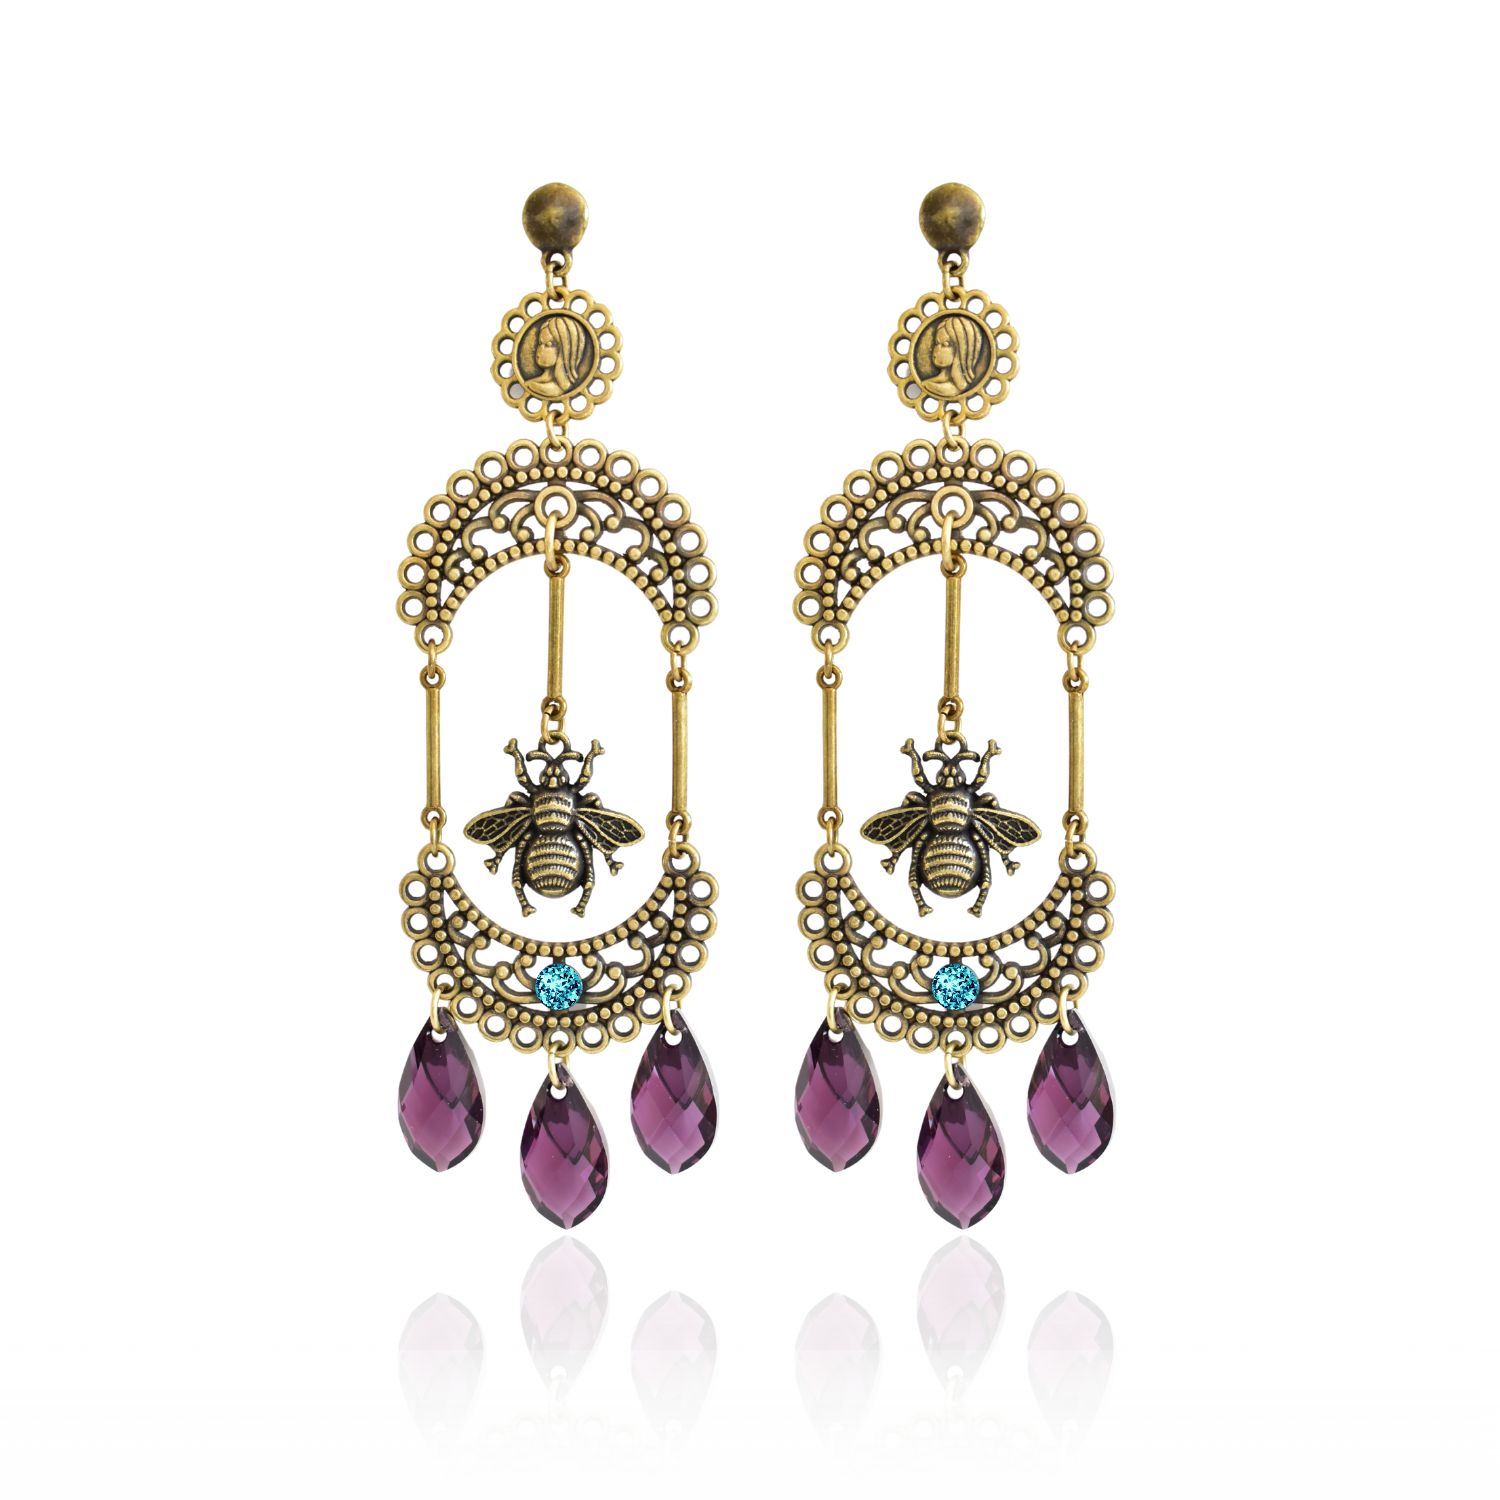 These earrings are made from Swarovski teardrops and have a handcrafted filigree design. The finish is antique bronze and adds elegance to formal outfits. They are lightweight and make a statement with their significant design. The teardrop-shaped Swarovski crystals add a touch of glamour and sparkle to these earrings, making them a must-have accessory for any occasion. Whether you're dressing up for a night out or keeping it casual for a day of shopping, these earrings will elevate your look with their sophisticated style. The crescent filigree design is handcrafted with great care and attention to detail, ensuring that these earrings are not only beautiful, but also durable and long-lasting. The Madonna medallion and fly charm add a unique touch, making these earrings a true one-of-a-kind piece. The super lightweight design makes these earrings comfortable to wear for extended periods of time, so you can rock your look with confidence all day long. Whether you're heading to a formal event or just running errands, these earrings are sure to make you feel fabulous. So if you're looking for a stylish and sophisticated accessory that will turn heads, these handcrafted crescent filigree Swarovski teardrop earrings are the perfect choice. So dare to dangle and make a statement with your style today!